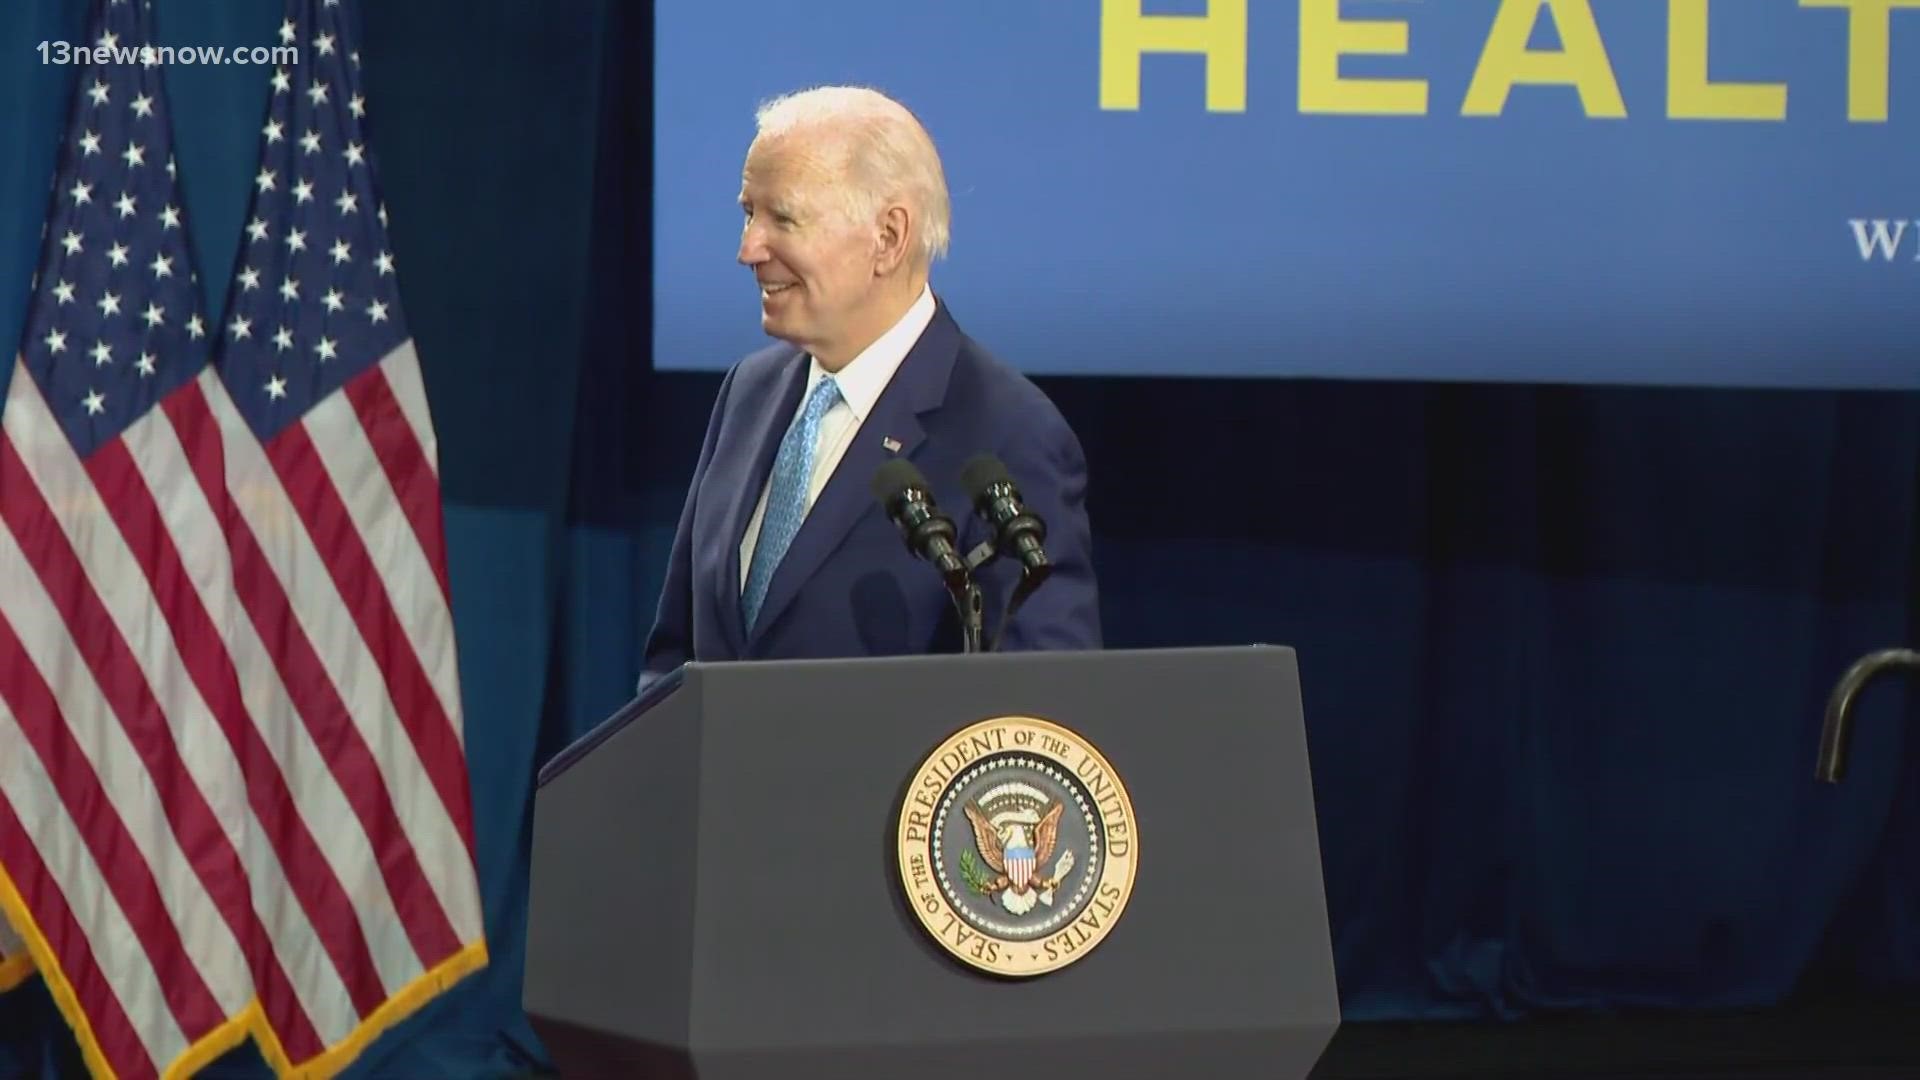 The last time President Biden visited Hampton Roads was in May of 2021 during his "Get America Back on Track" tour.